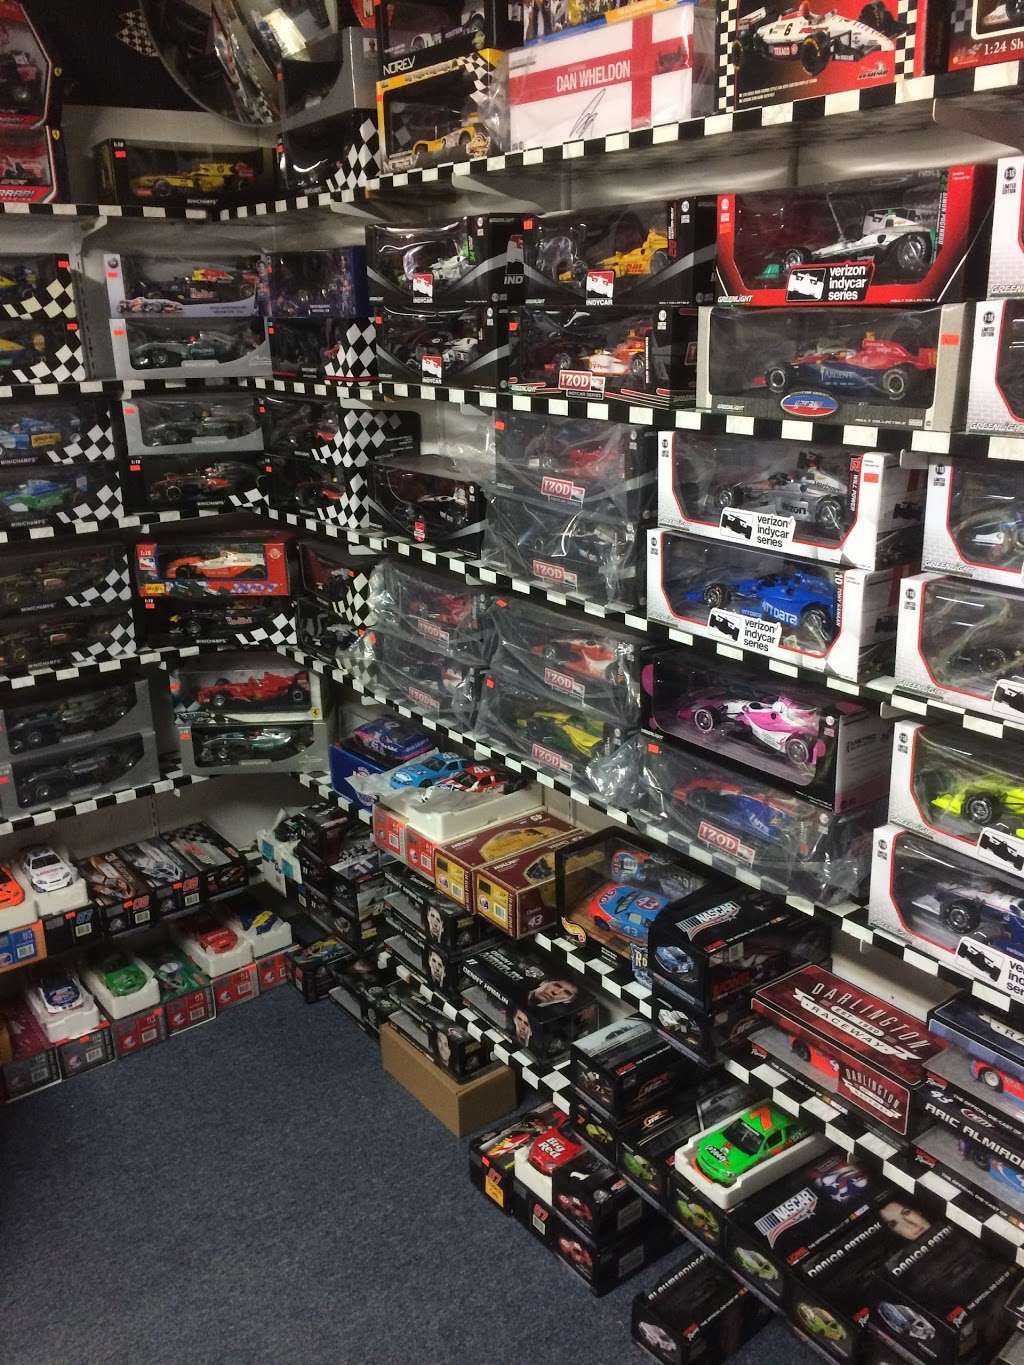 Farners Racing Collectables | 2048 Black Gap Rd, Fayetteville, PA 17222, USA | Phone: (717) 352-2782